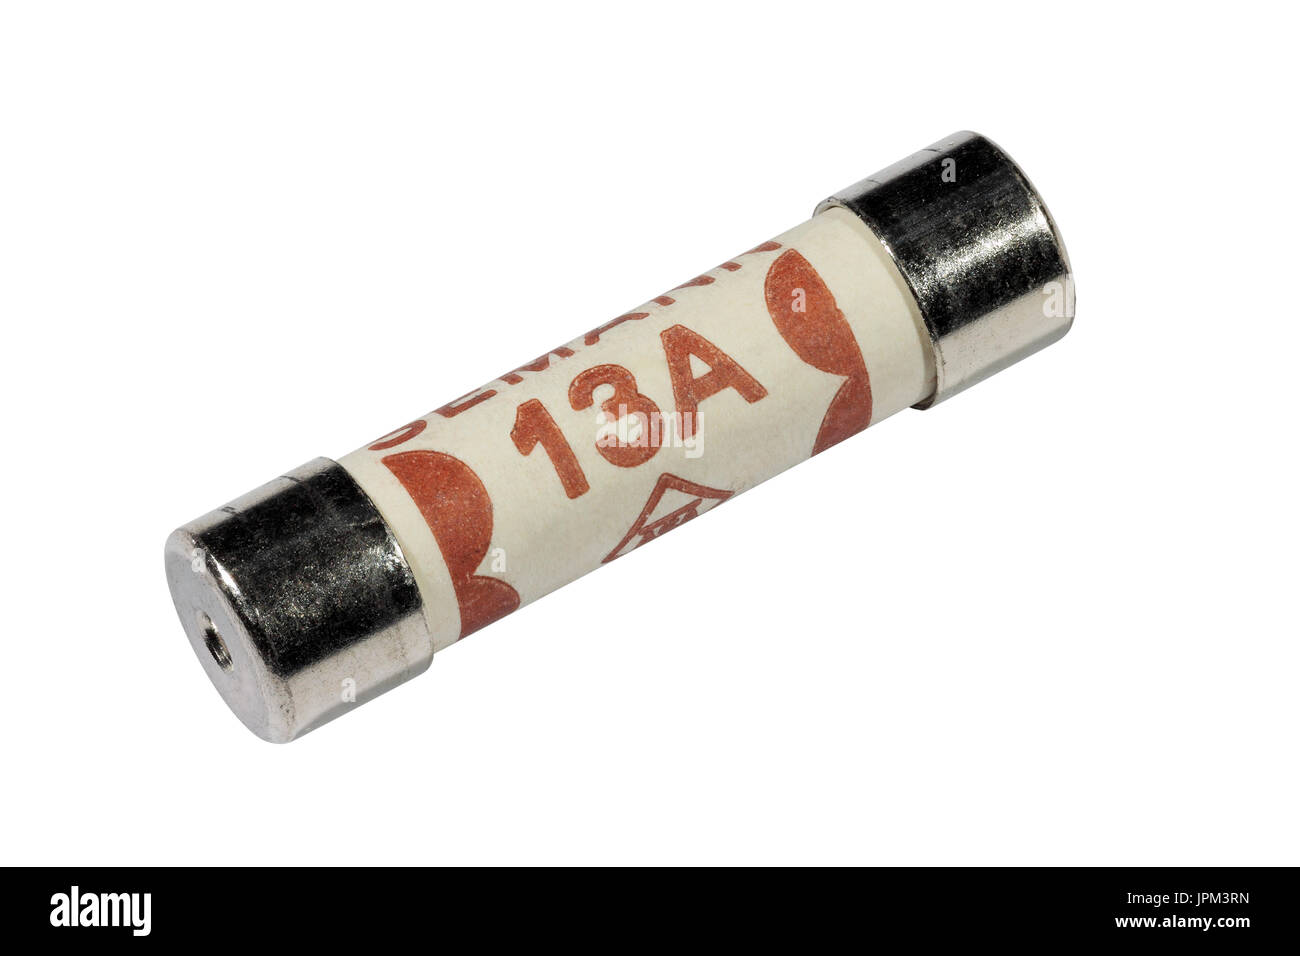 A 13 amp electrical fuse isolated on a white background Stock Photo